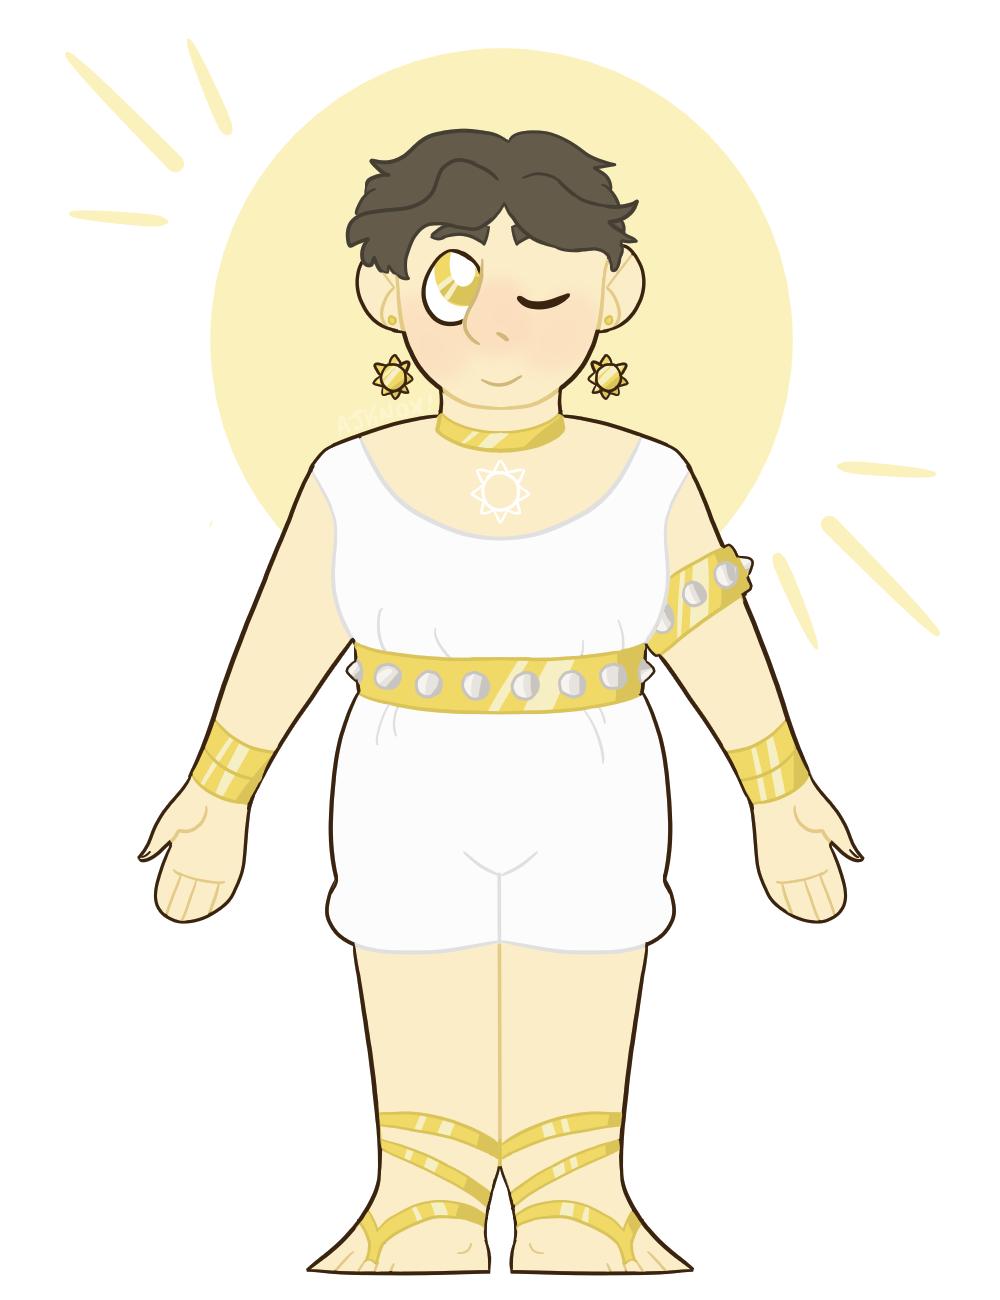 A light-skinned humanoid that's slightly chubby. He has a white romper with shorts, pulled to his waist with a spiky golden belt. A matching arm band is on his right arm, along with gold bracelets on both arms. He's wearing golden sandals and sun earrings. The sun is tattoed on his chest in white. He has short brownish-gray hair and has a warmly smiling expression. His right eye is closed but the left is open, showing its golden color and that his pupil is pure white. A pale yellow circle is in the background behind him, giving off rays like a sun.